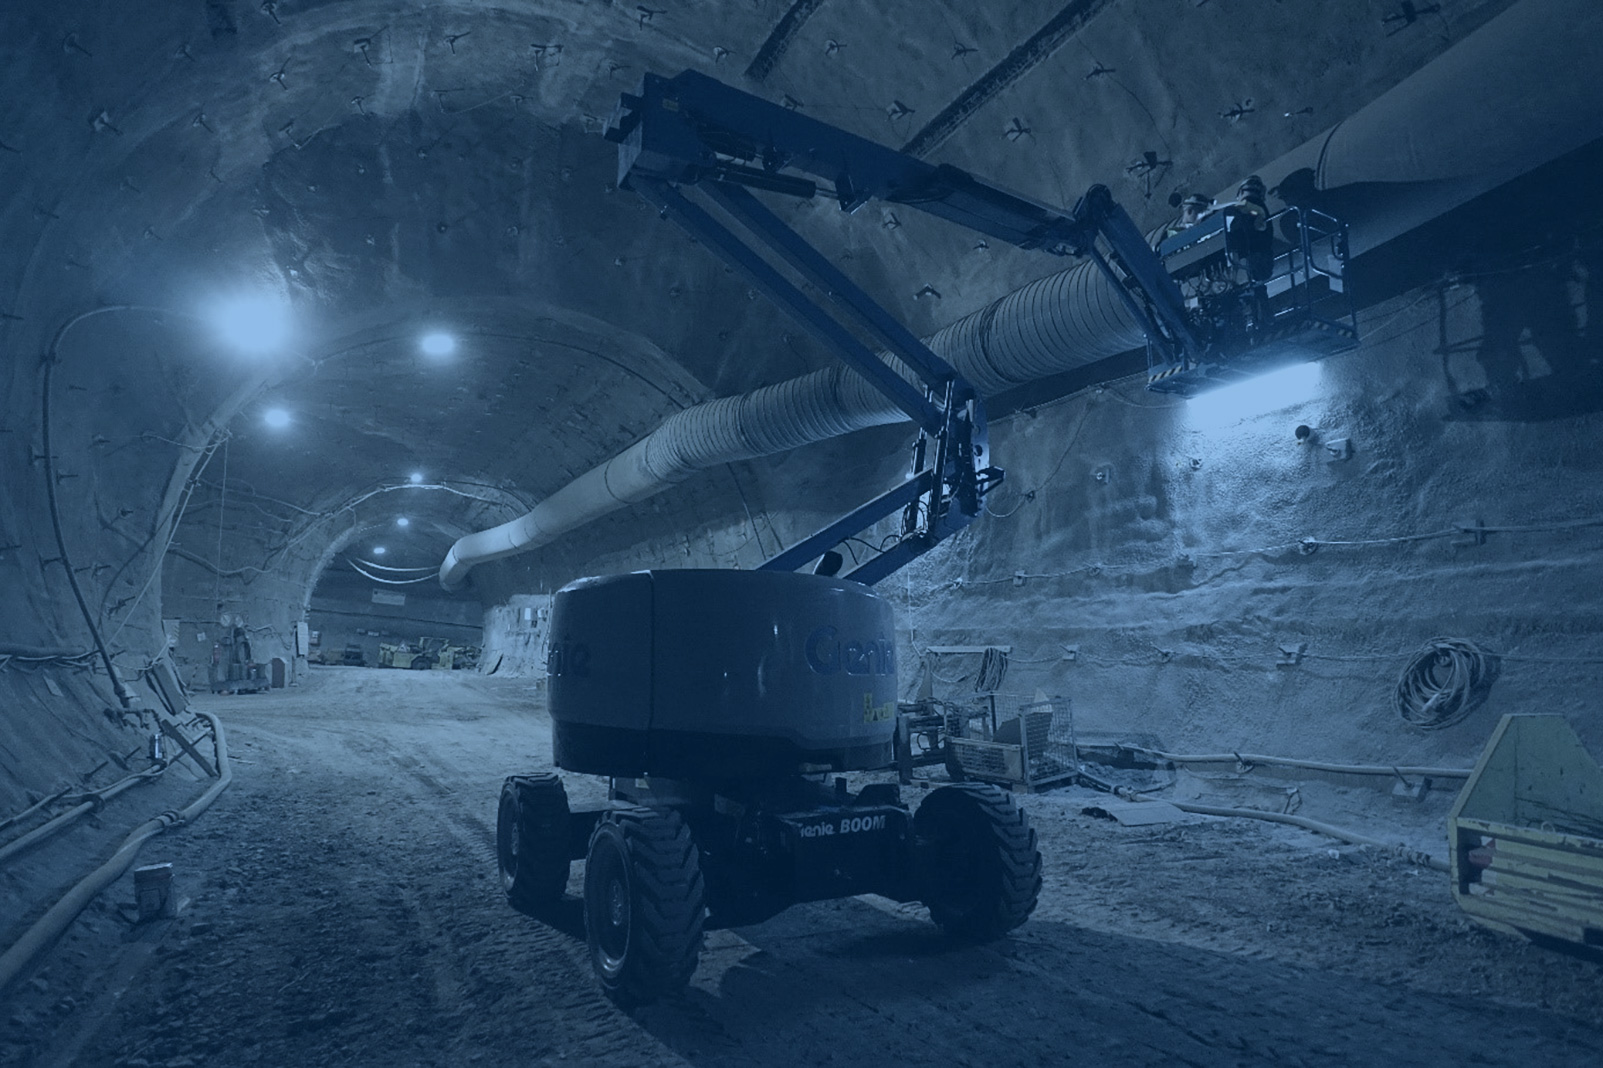 In-Depth Access to Mining Sites